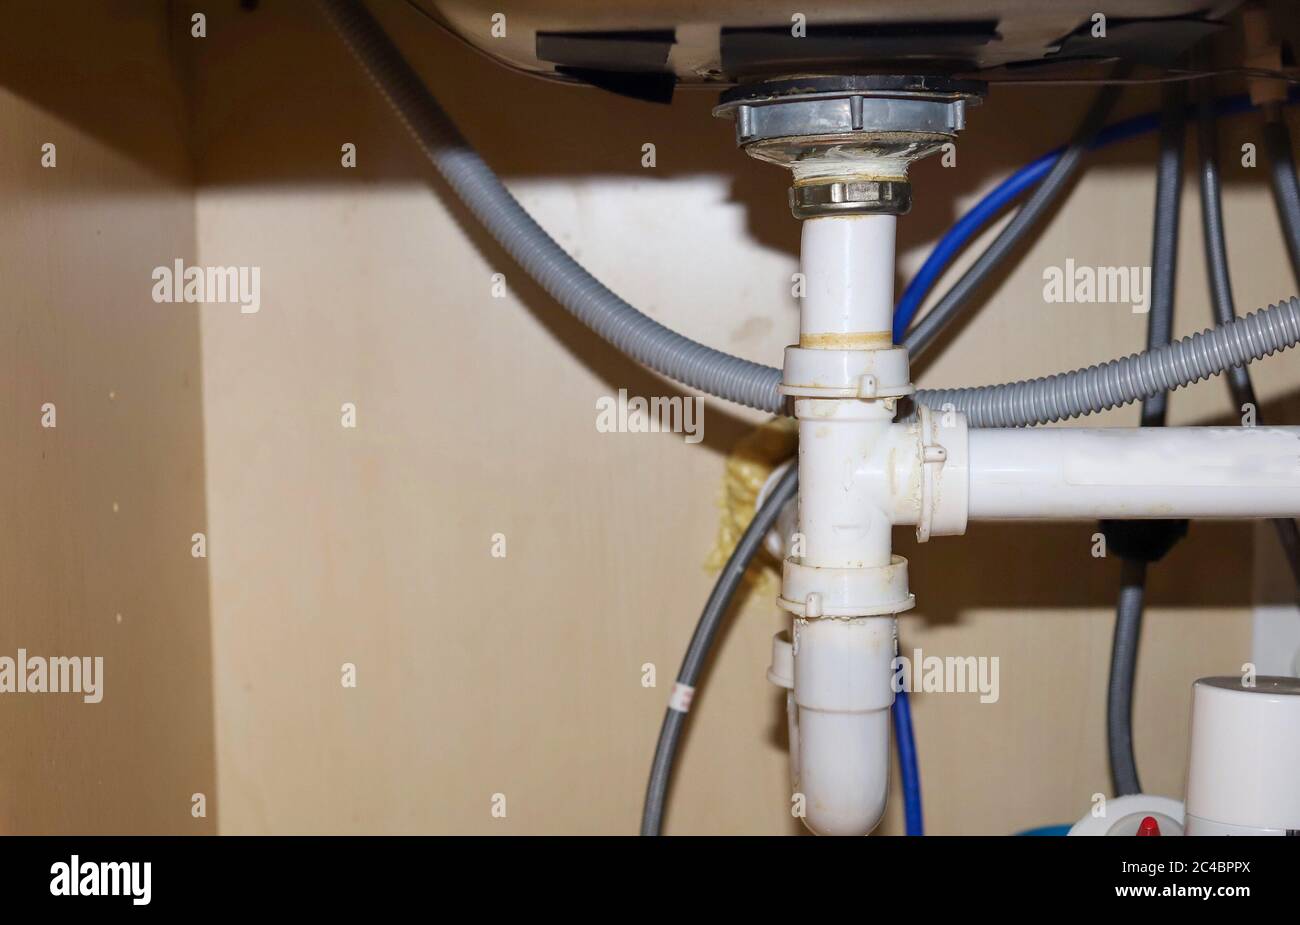 A close up image of leaking PCV pipes under a kitchen sink Stock Photo -  Alamy